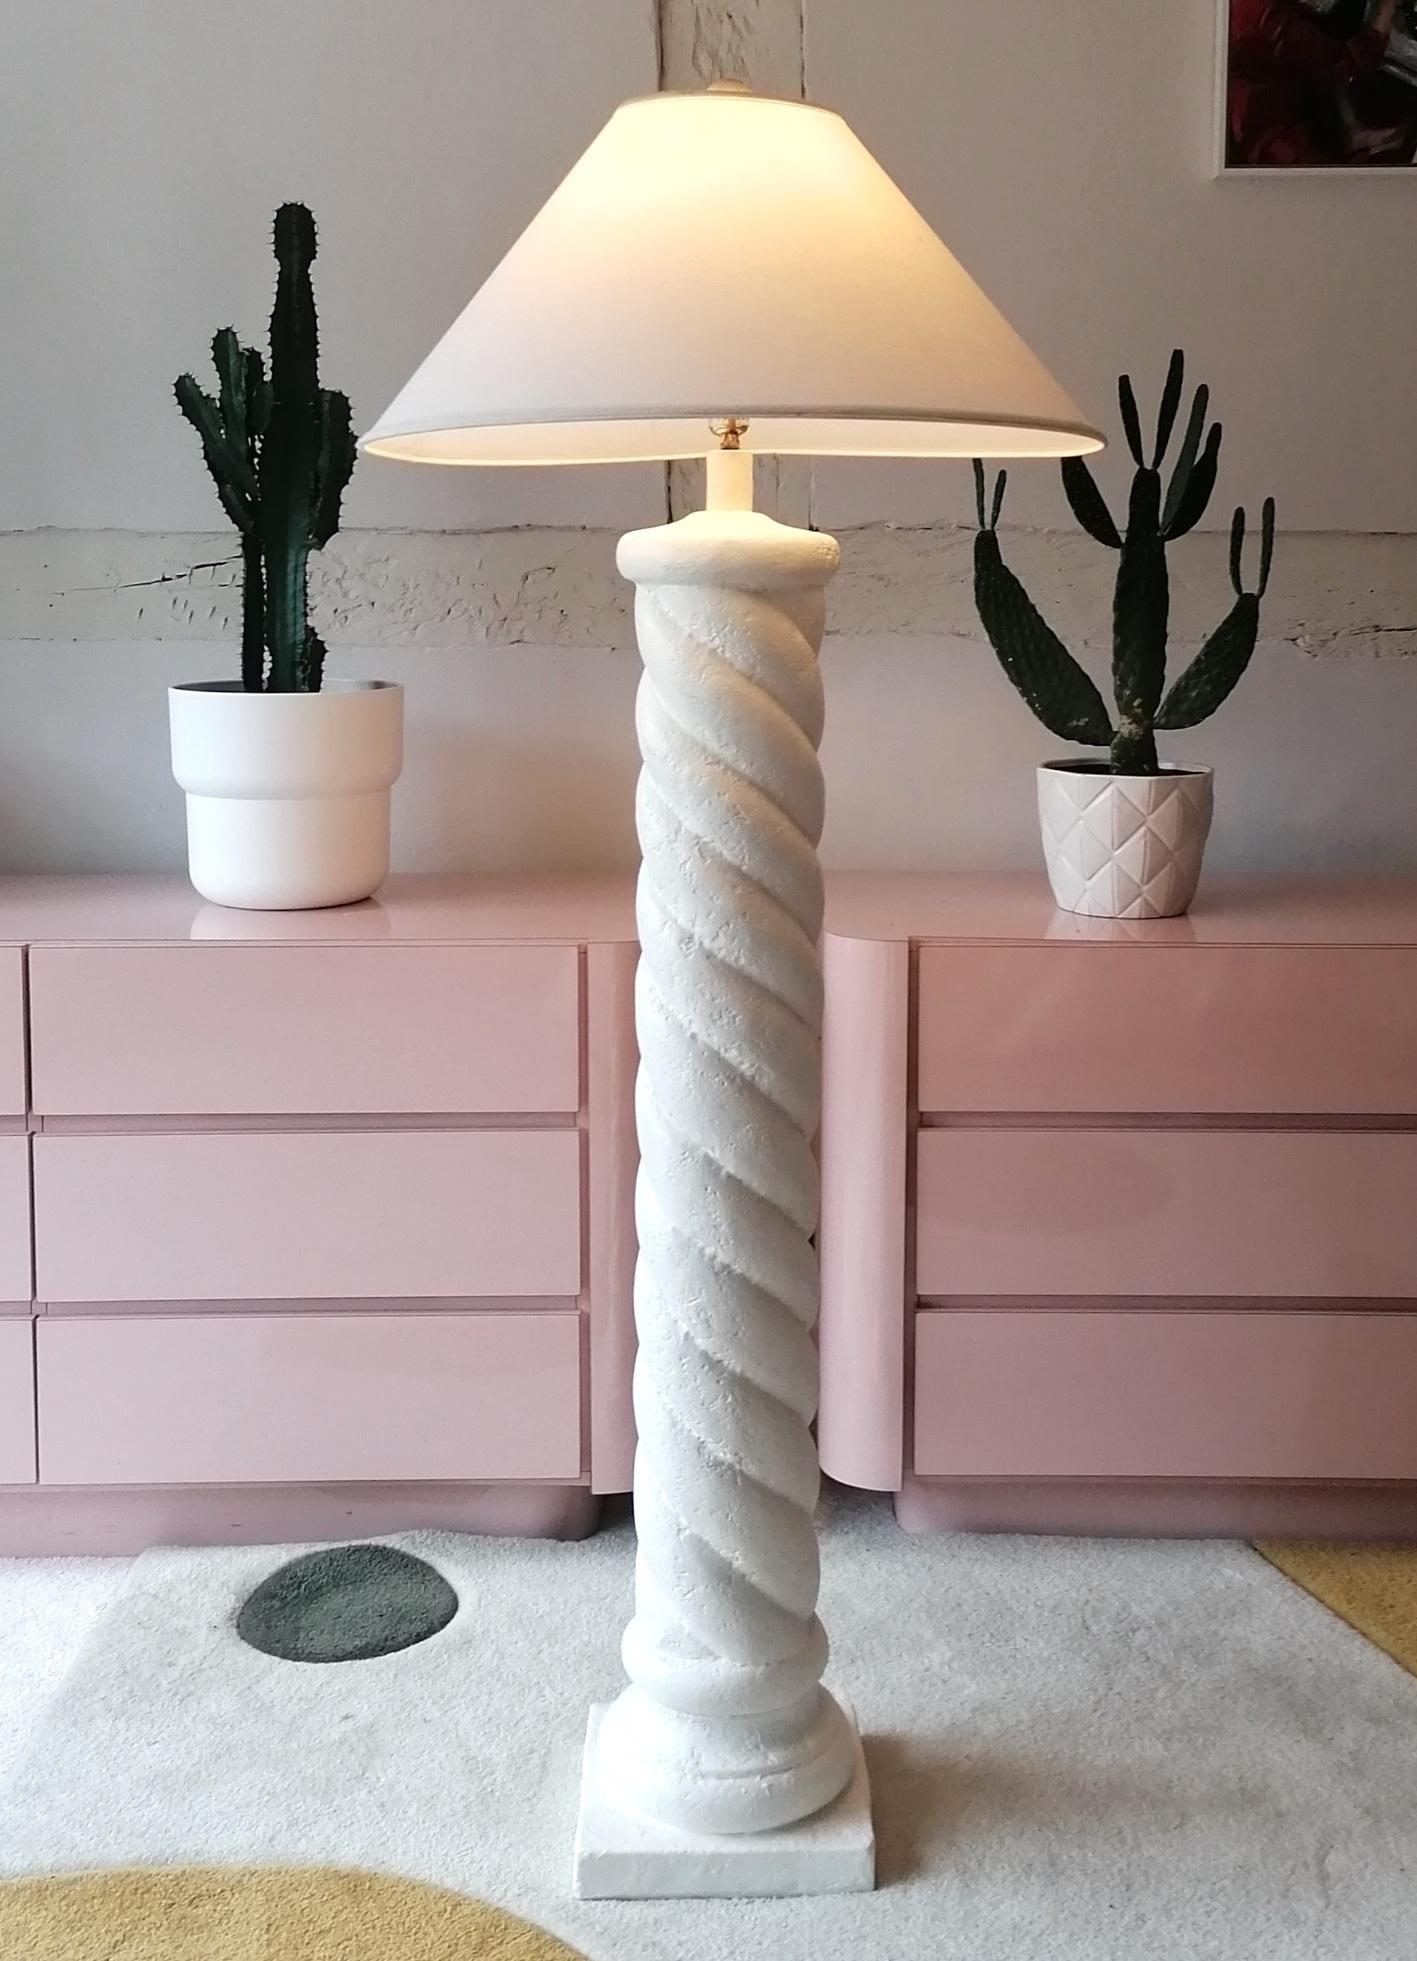 Vintage postmodern plaster spiral twist floor lamp, 1980s American. Stamped with 'Sun 89'. Newly rewired with white braided cord. Original shade has a couple of dings. Lamp is perfect.

Dimensions : height to top of shade 150cm, diameter of shade